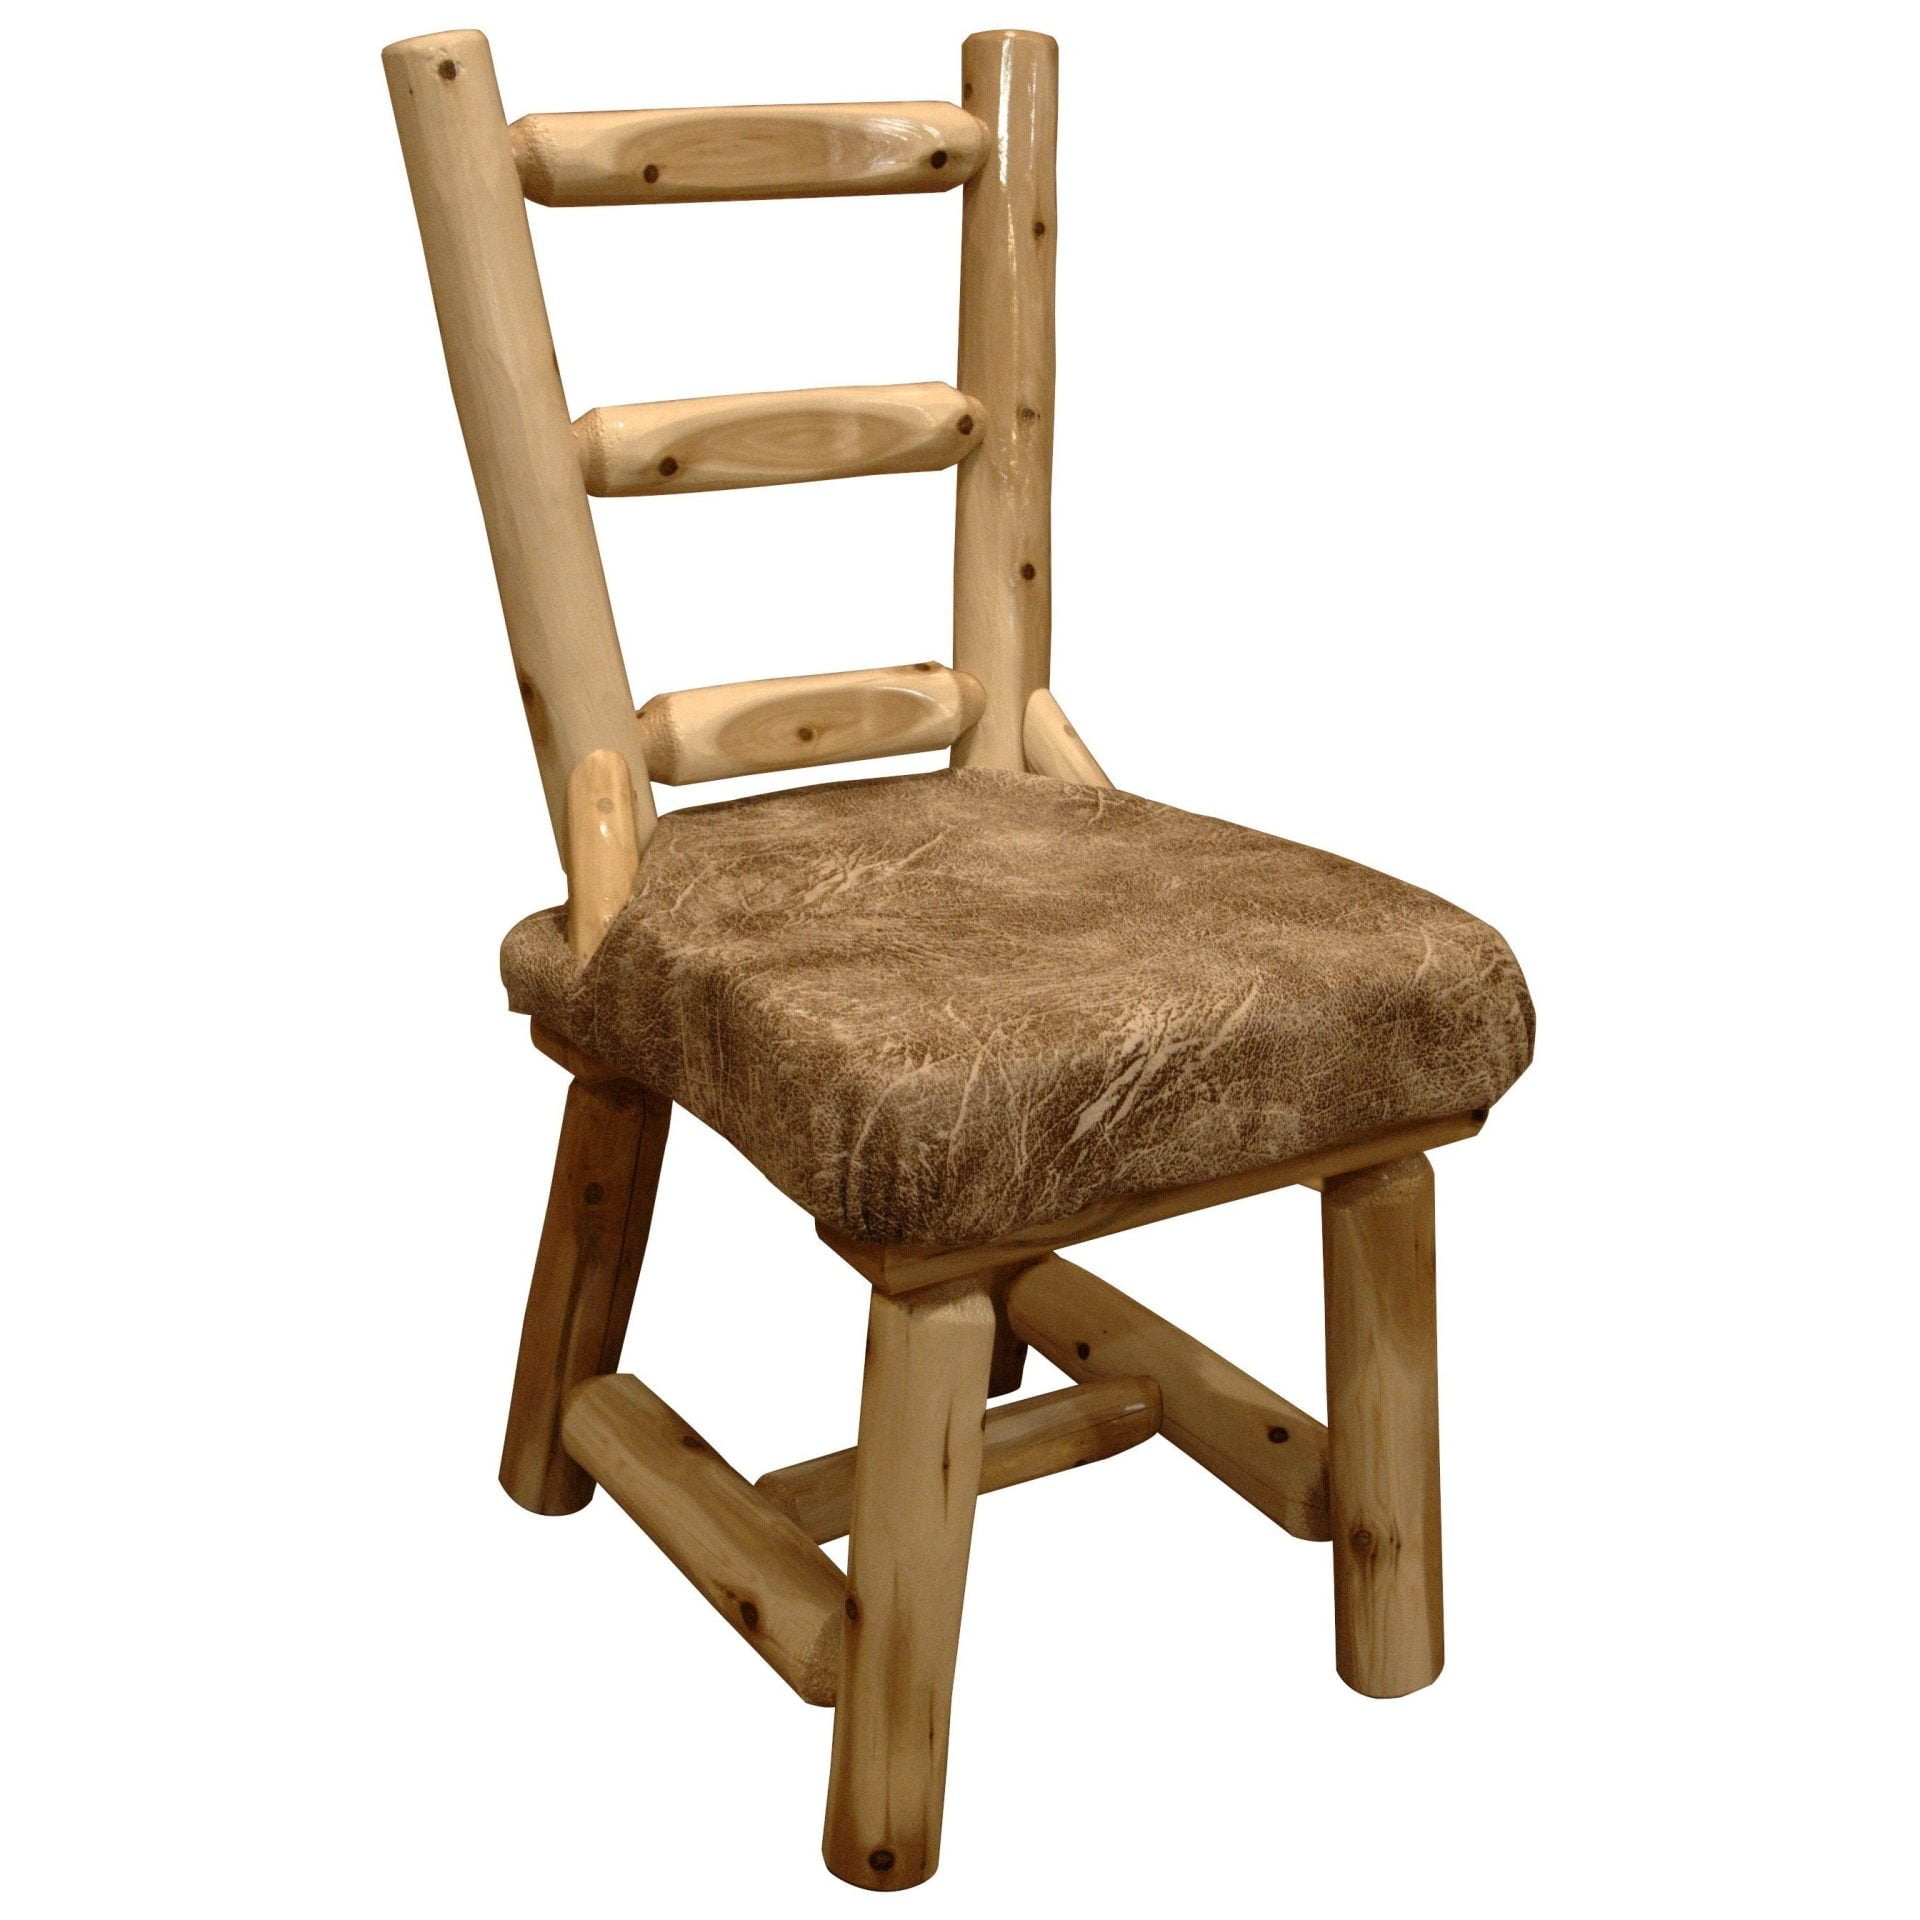 Rustic White Cedar Log Dining Chair with Upholstered Seat